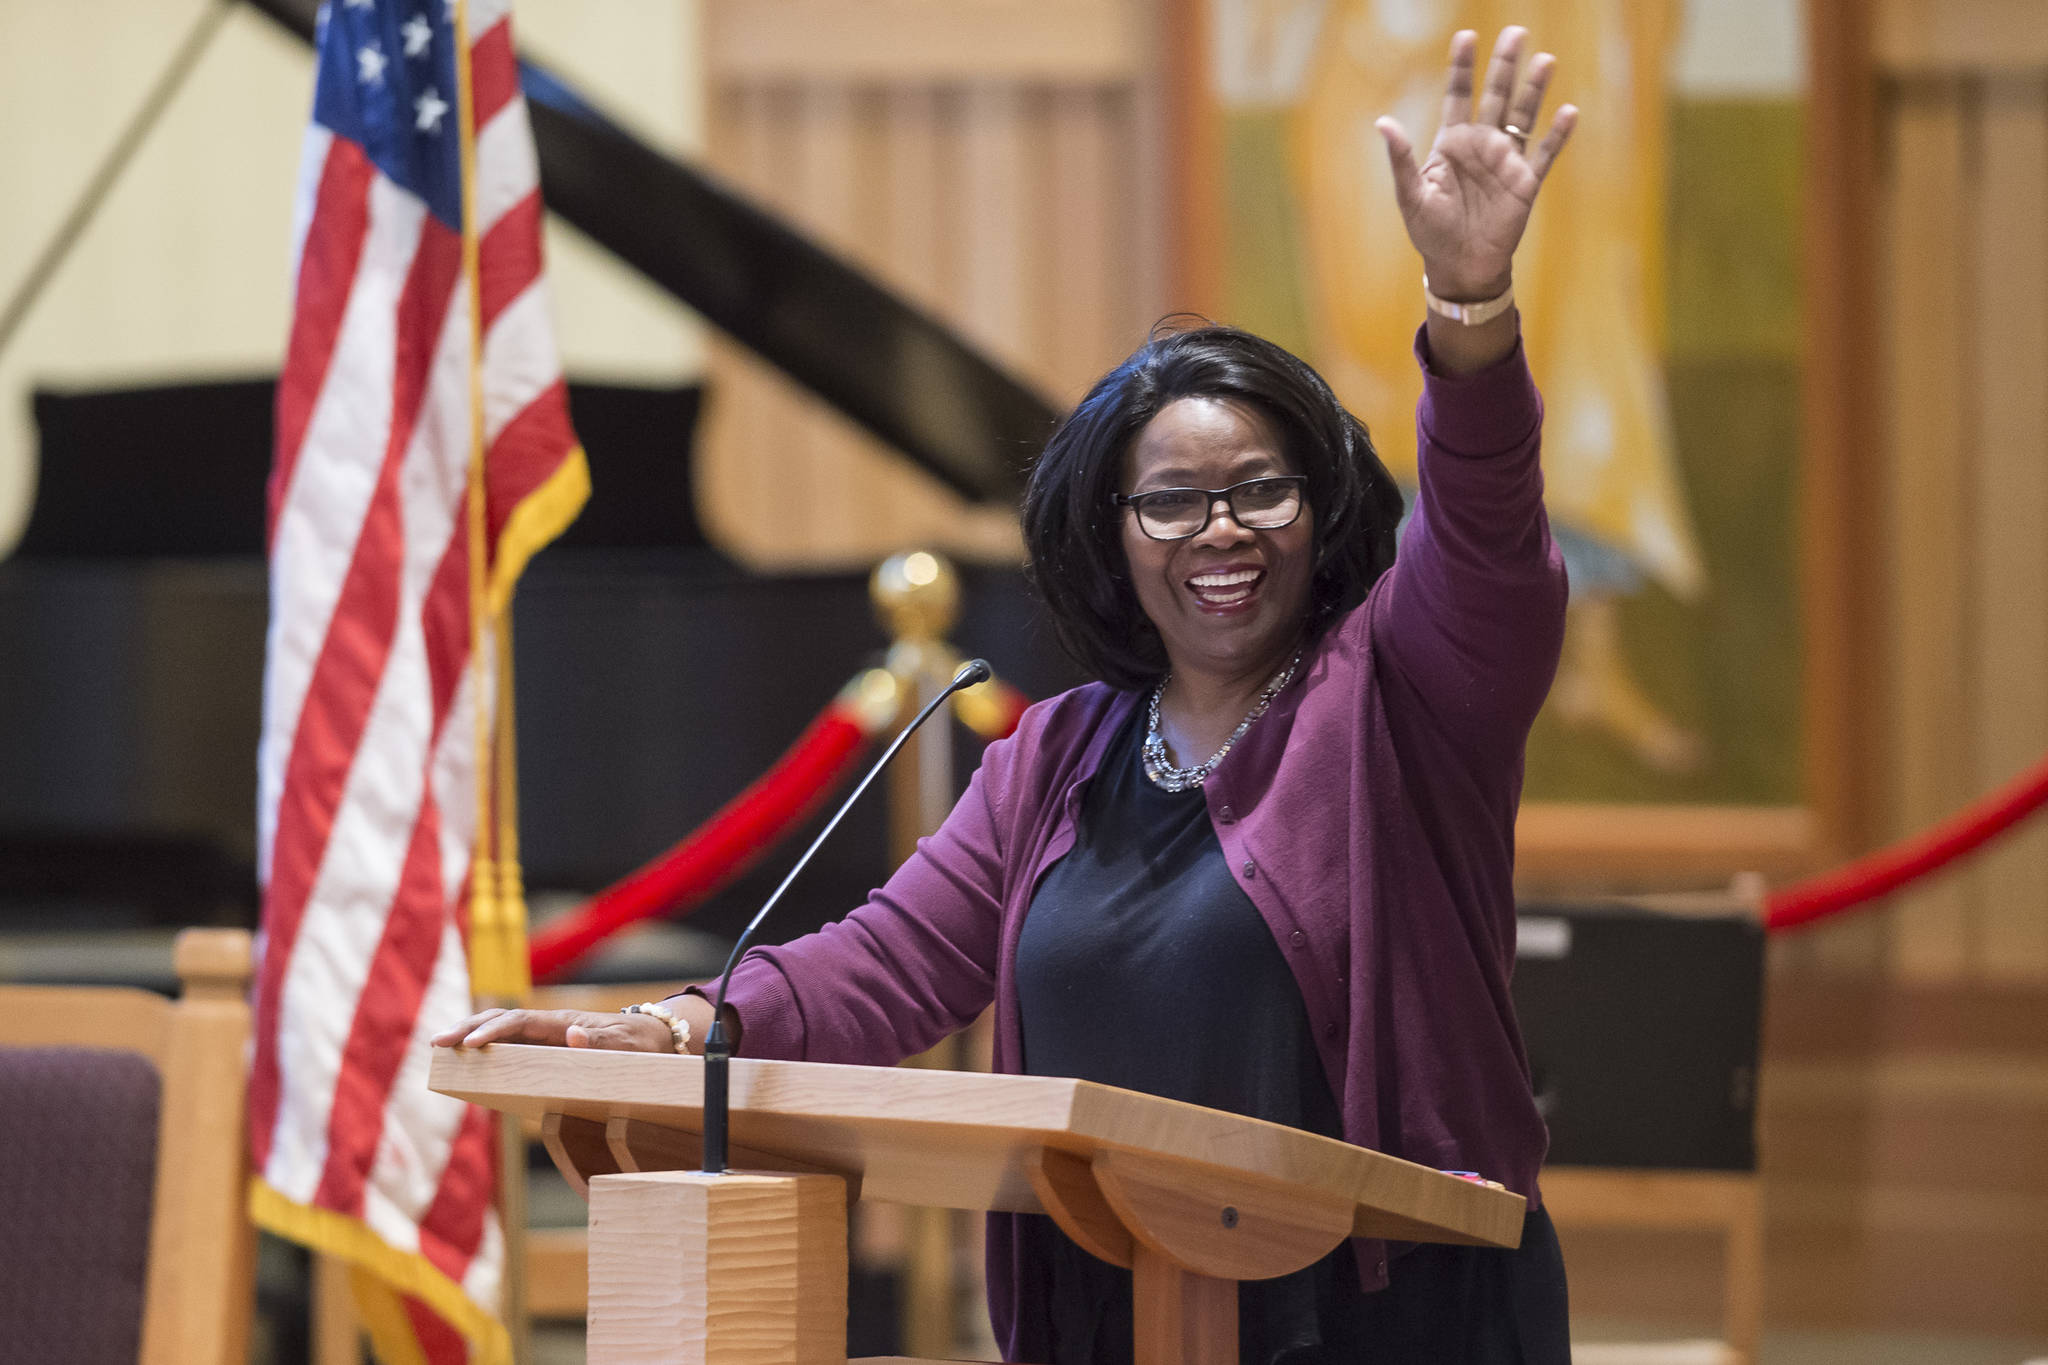 Speaker Michelle Monts, a former president of the Black Awareness Association, waves to her grandchildren in the audience at the Dr. Martin Luther King Jr. 2019 Community Celebration at St. Paul’s Catholic Church on Monday, Jan. 21, 2019. (Michael Penn | Juneau Empire)